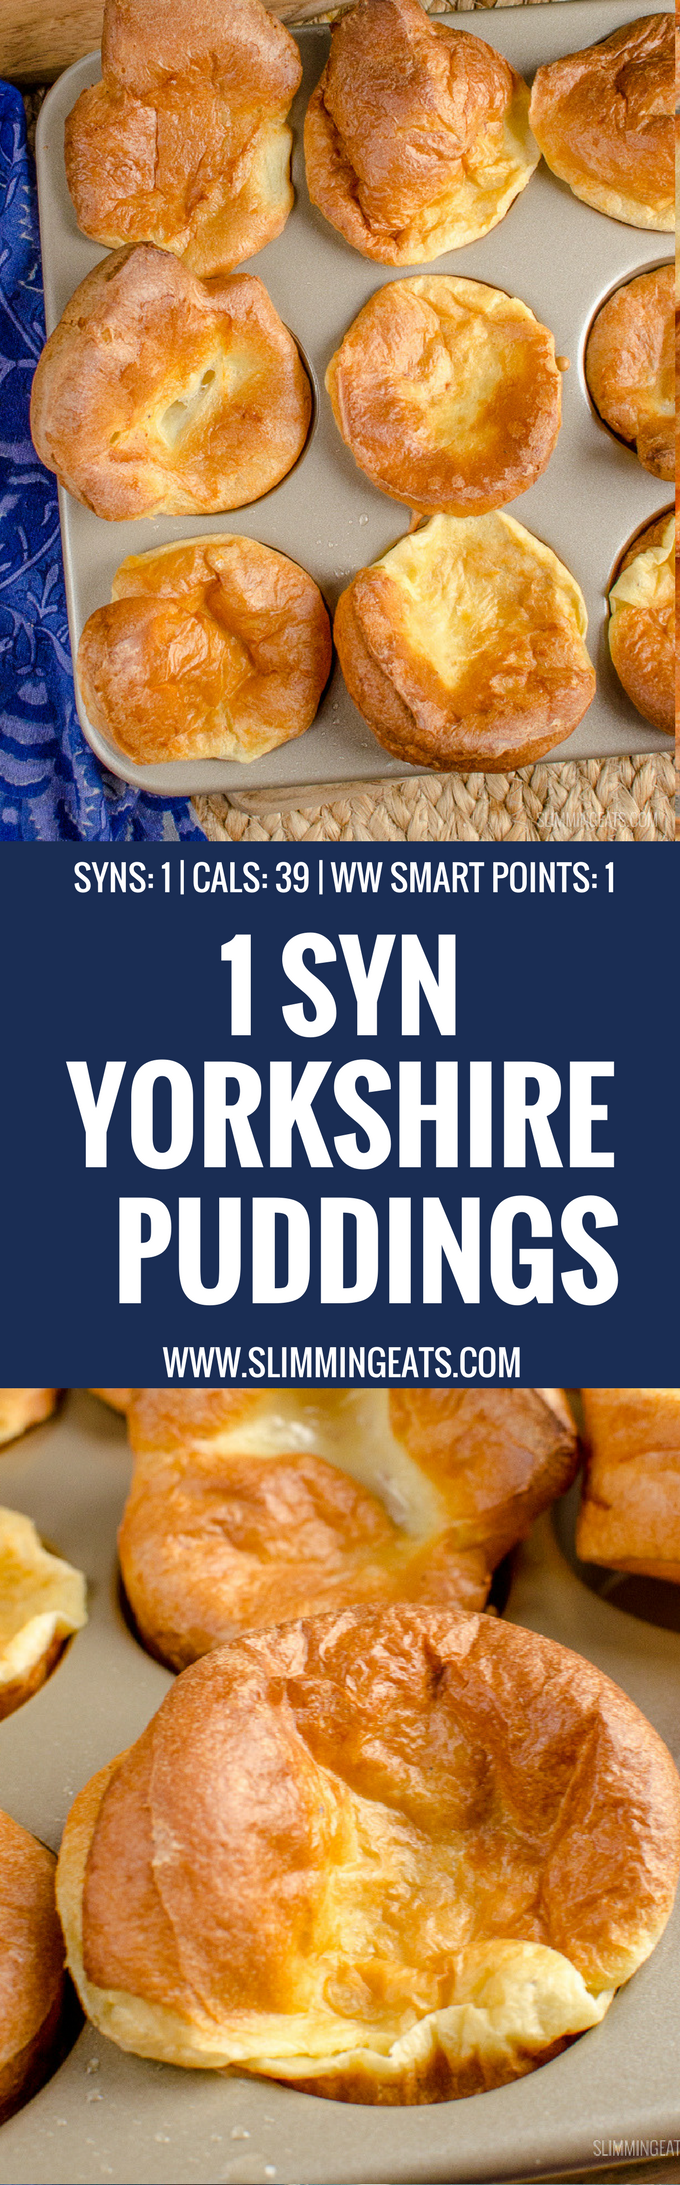 Slimming Eats 1 Syn Yorkshire Puddings - dairy free, vegetarian, Slimming World and Weight Watchers friendly